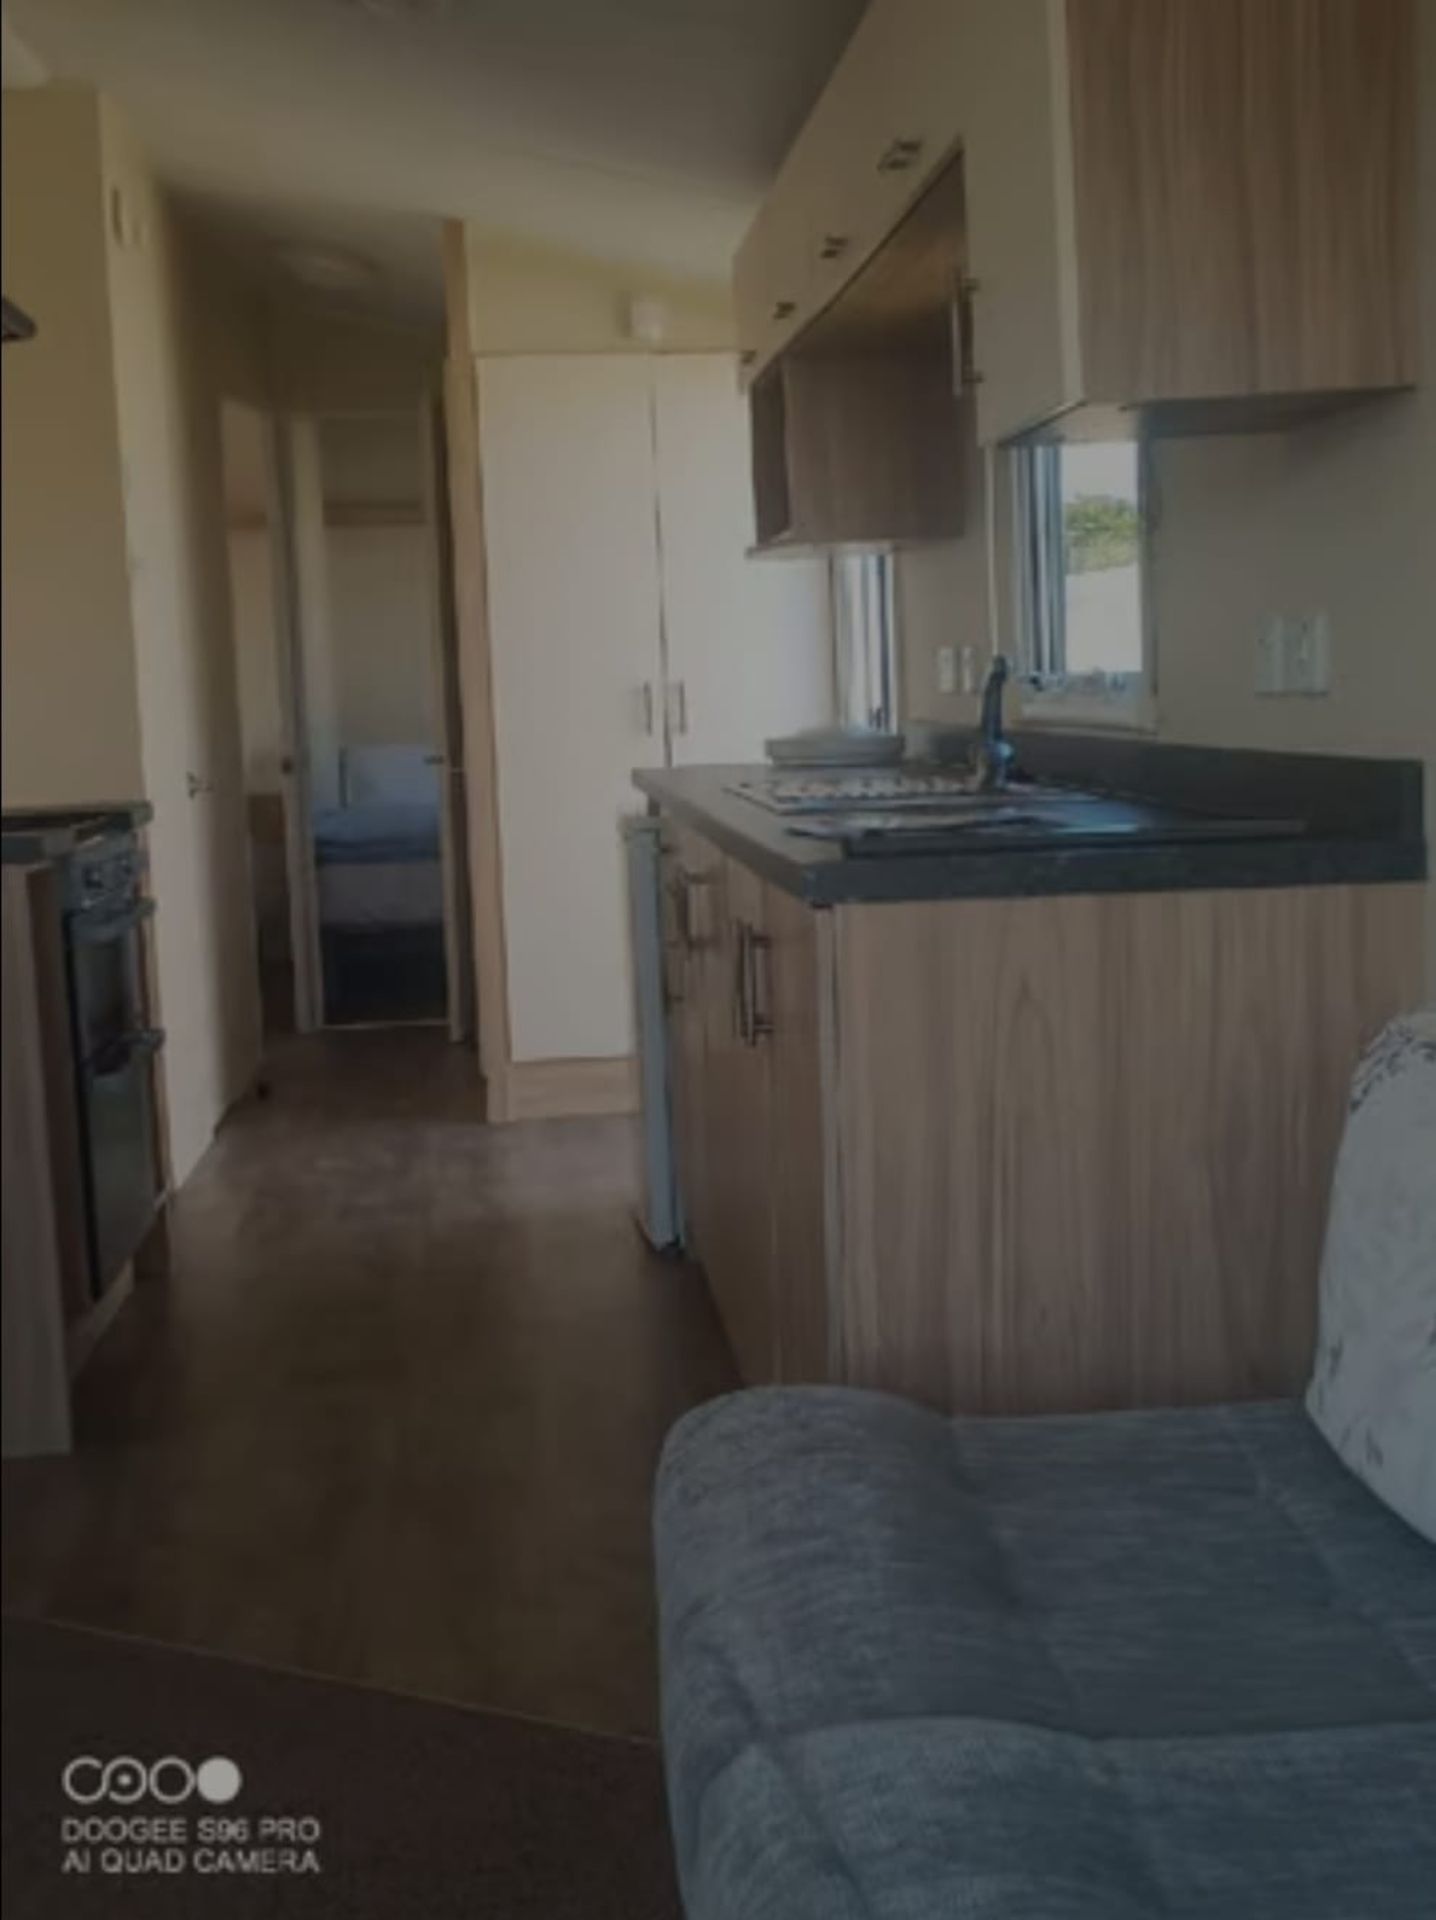 2015 WILLERBY ECO SALSA 3 BEDROOM holiday home ON-SITE SALE. LAST CHANCE!!! **RESERVE REDUCED** - Image 13 of 13